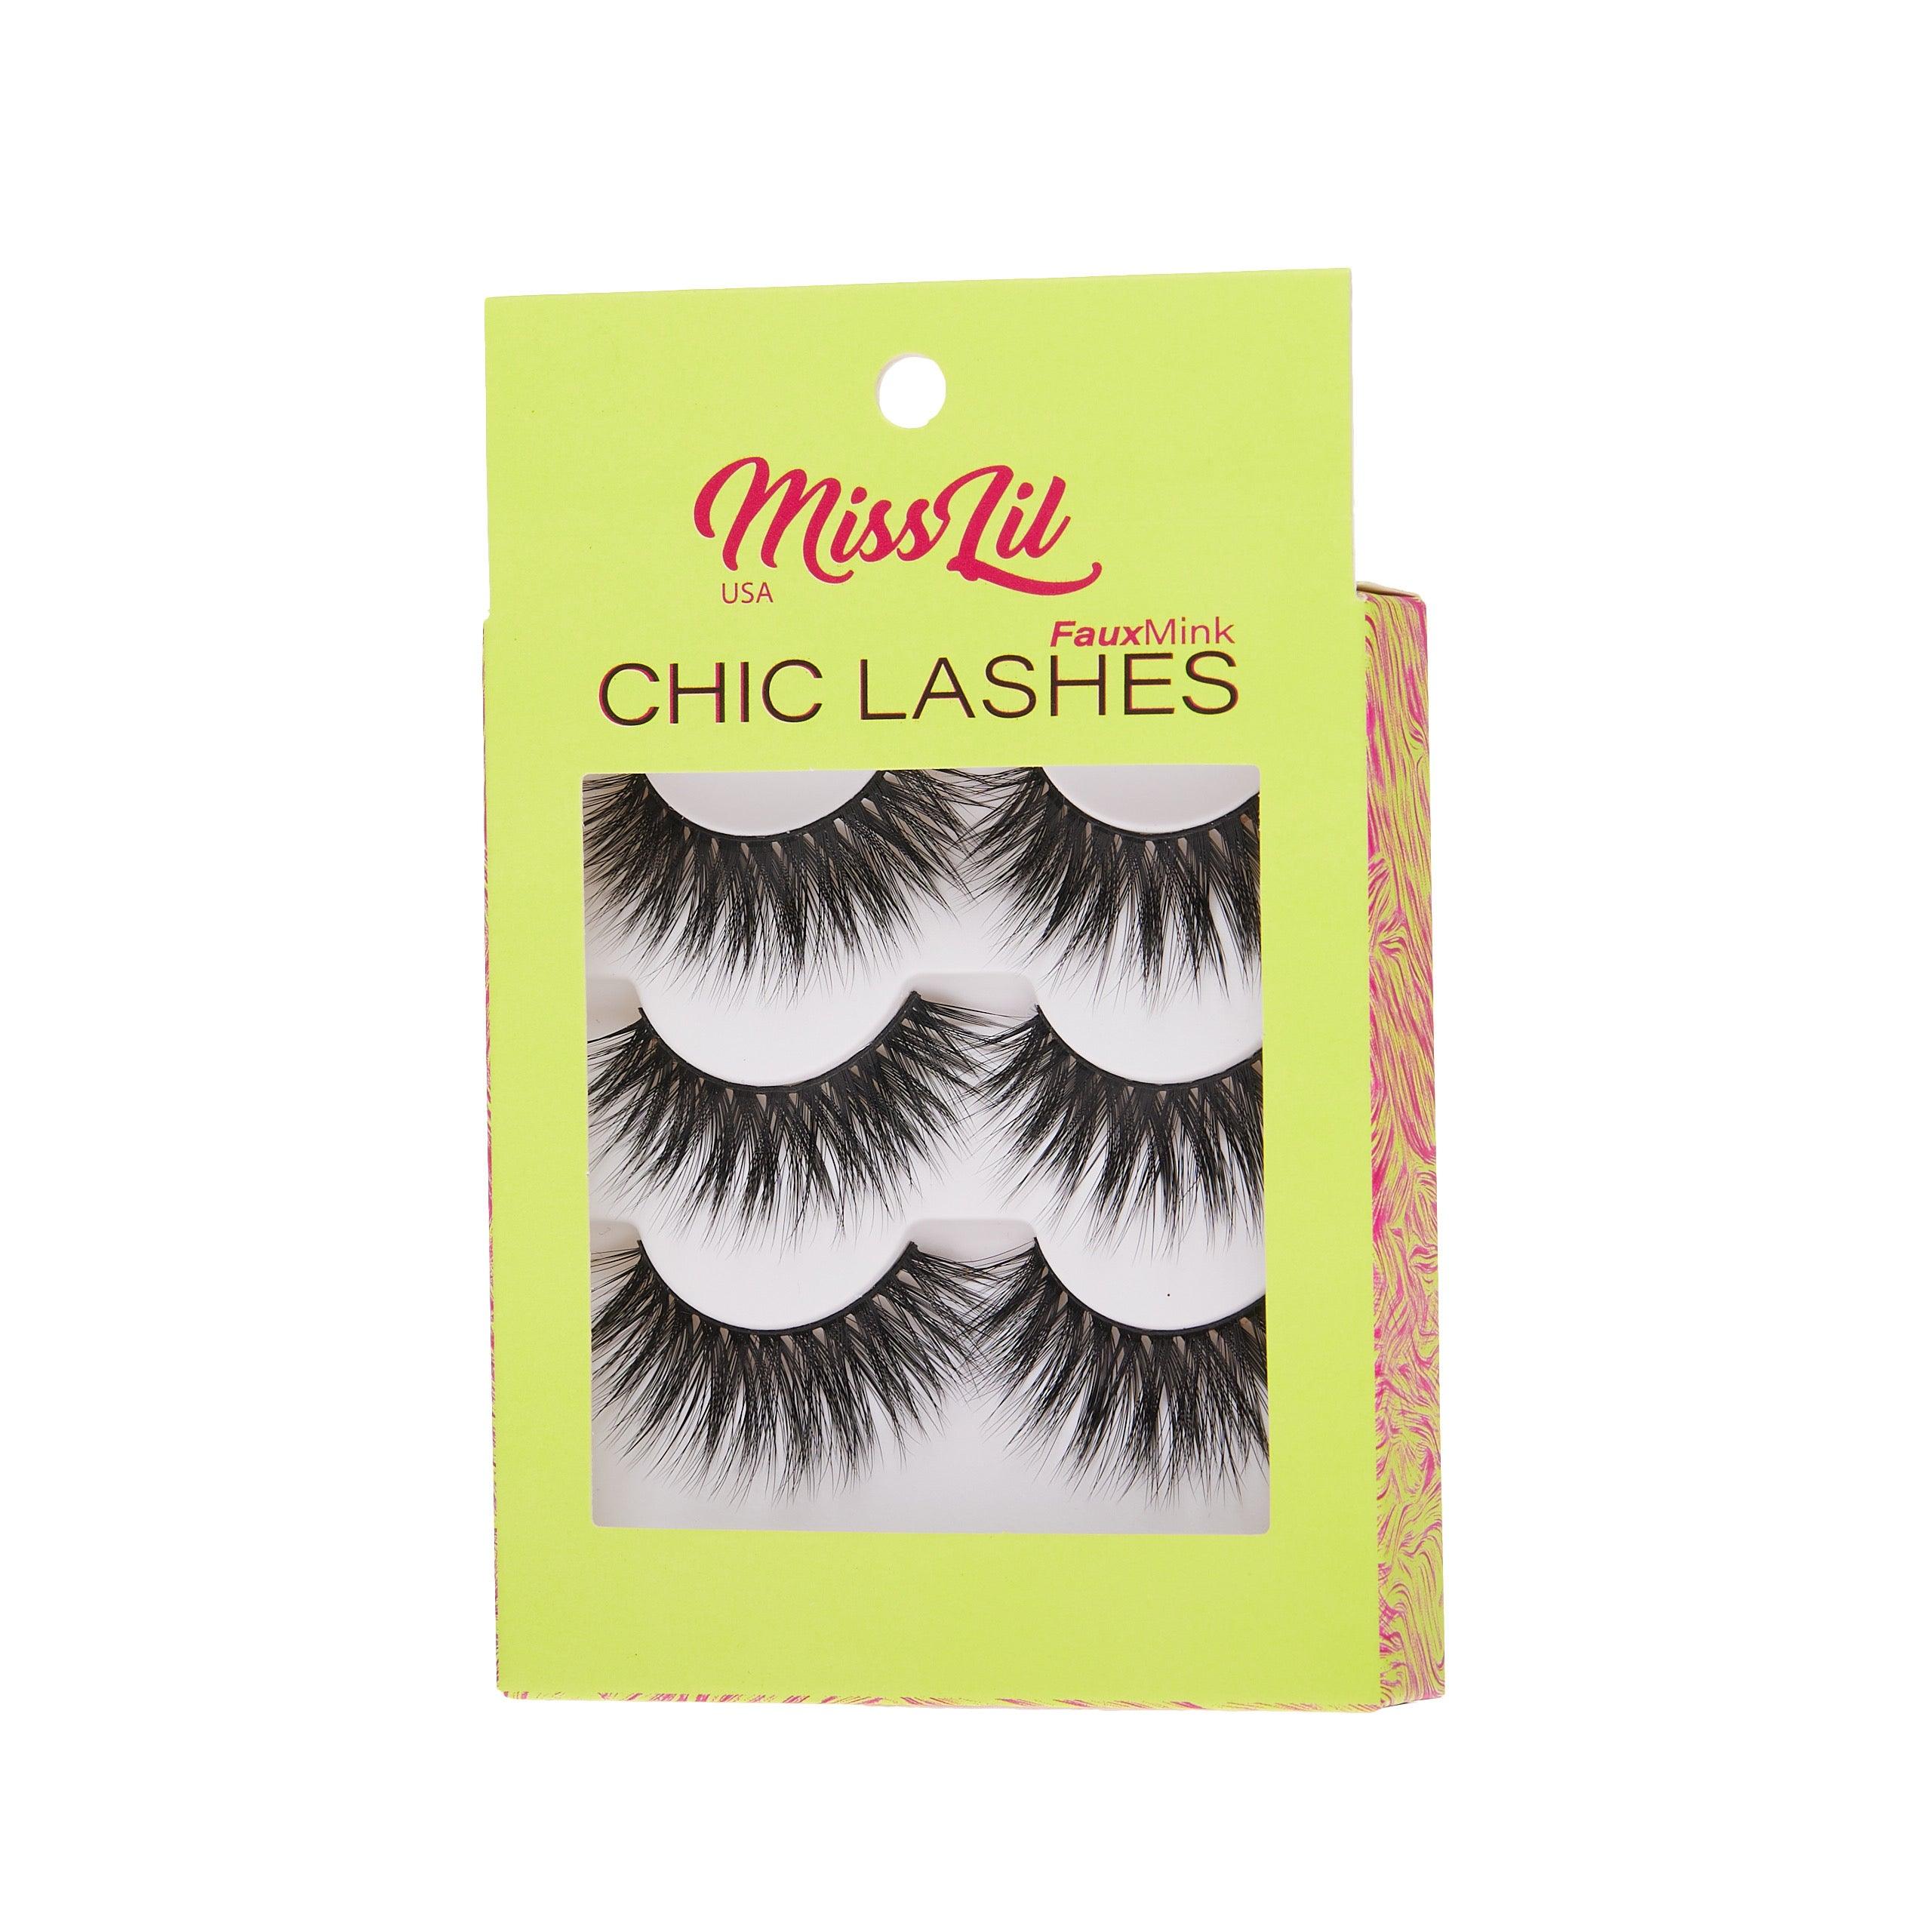 3-Pair Faux Mink Eyelashes - Chic Lashes Collection #8 - Pack of 3 - Miss Lil USA